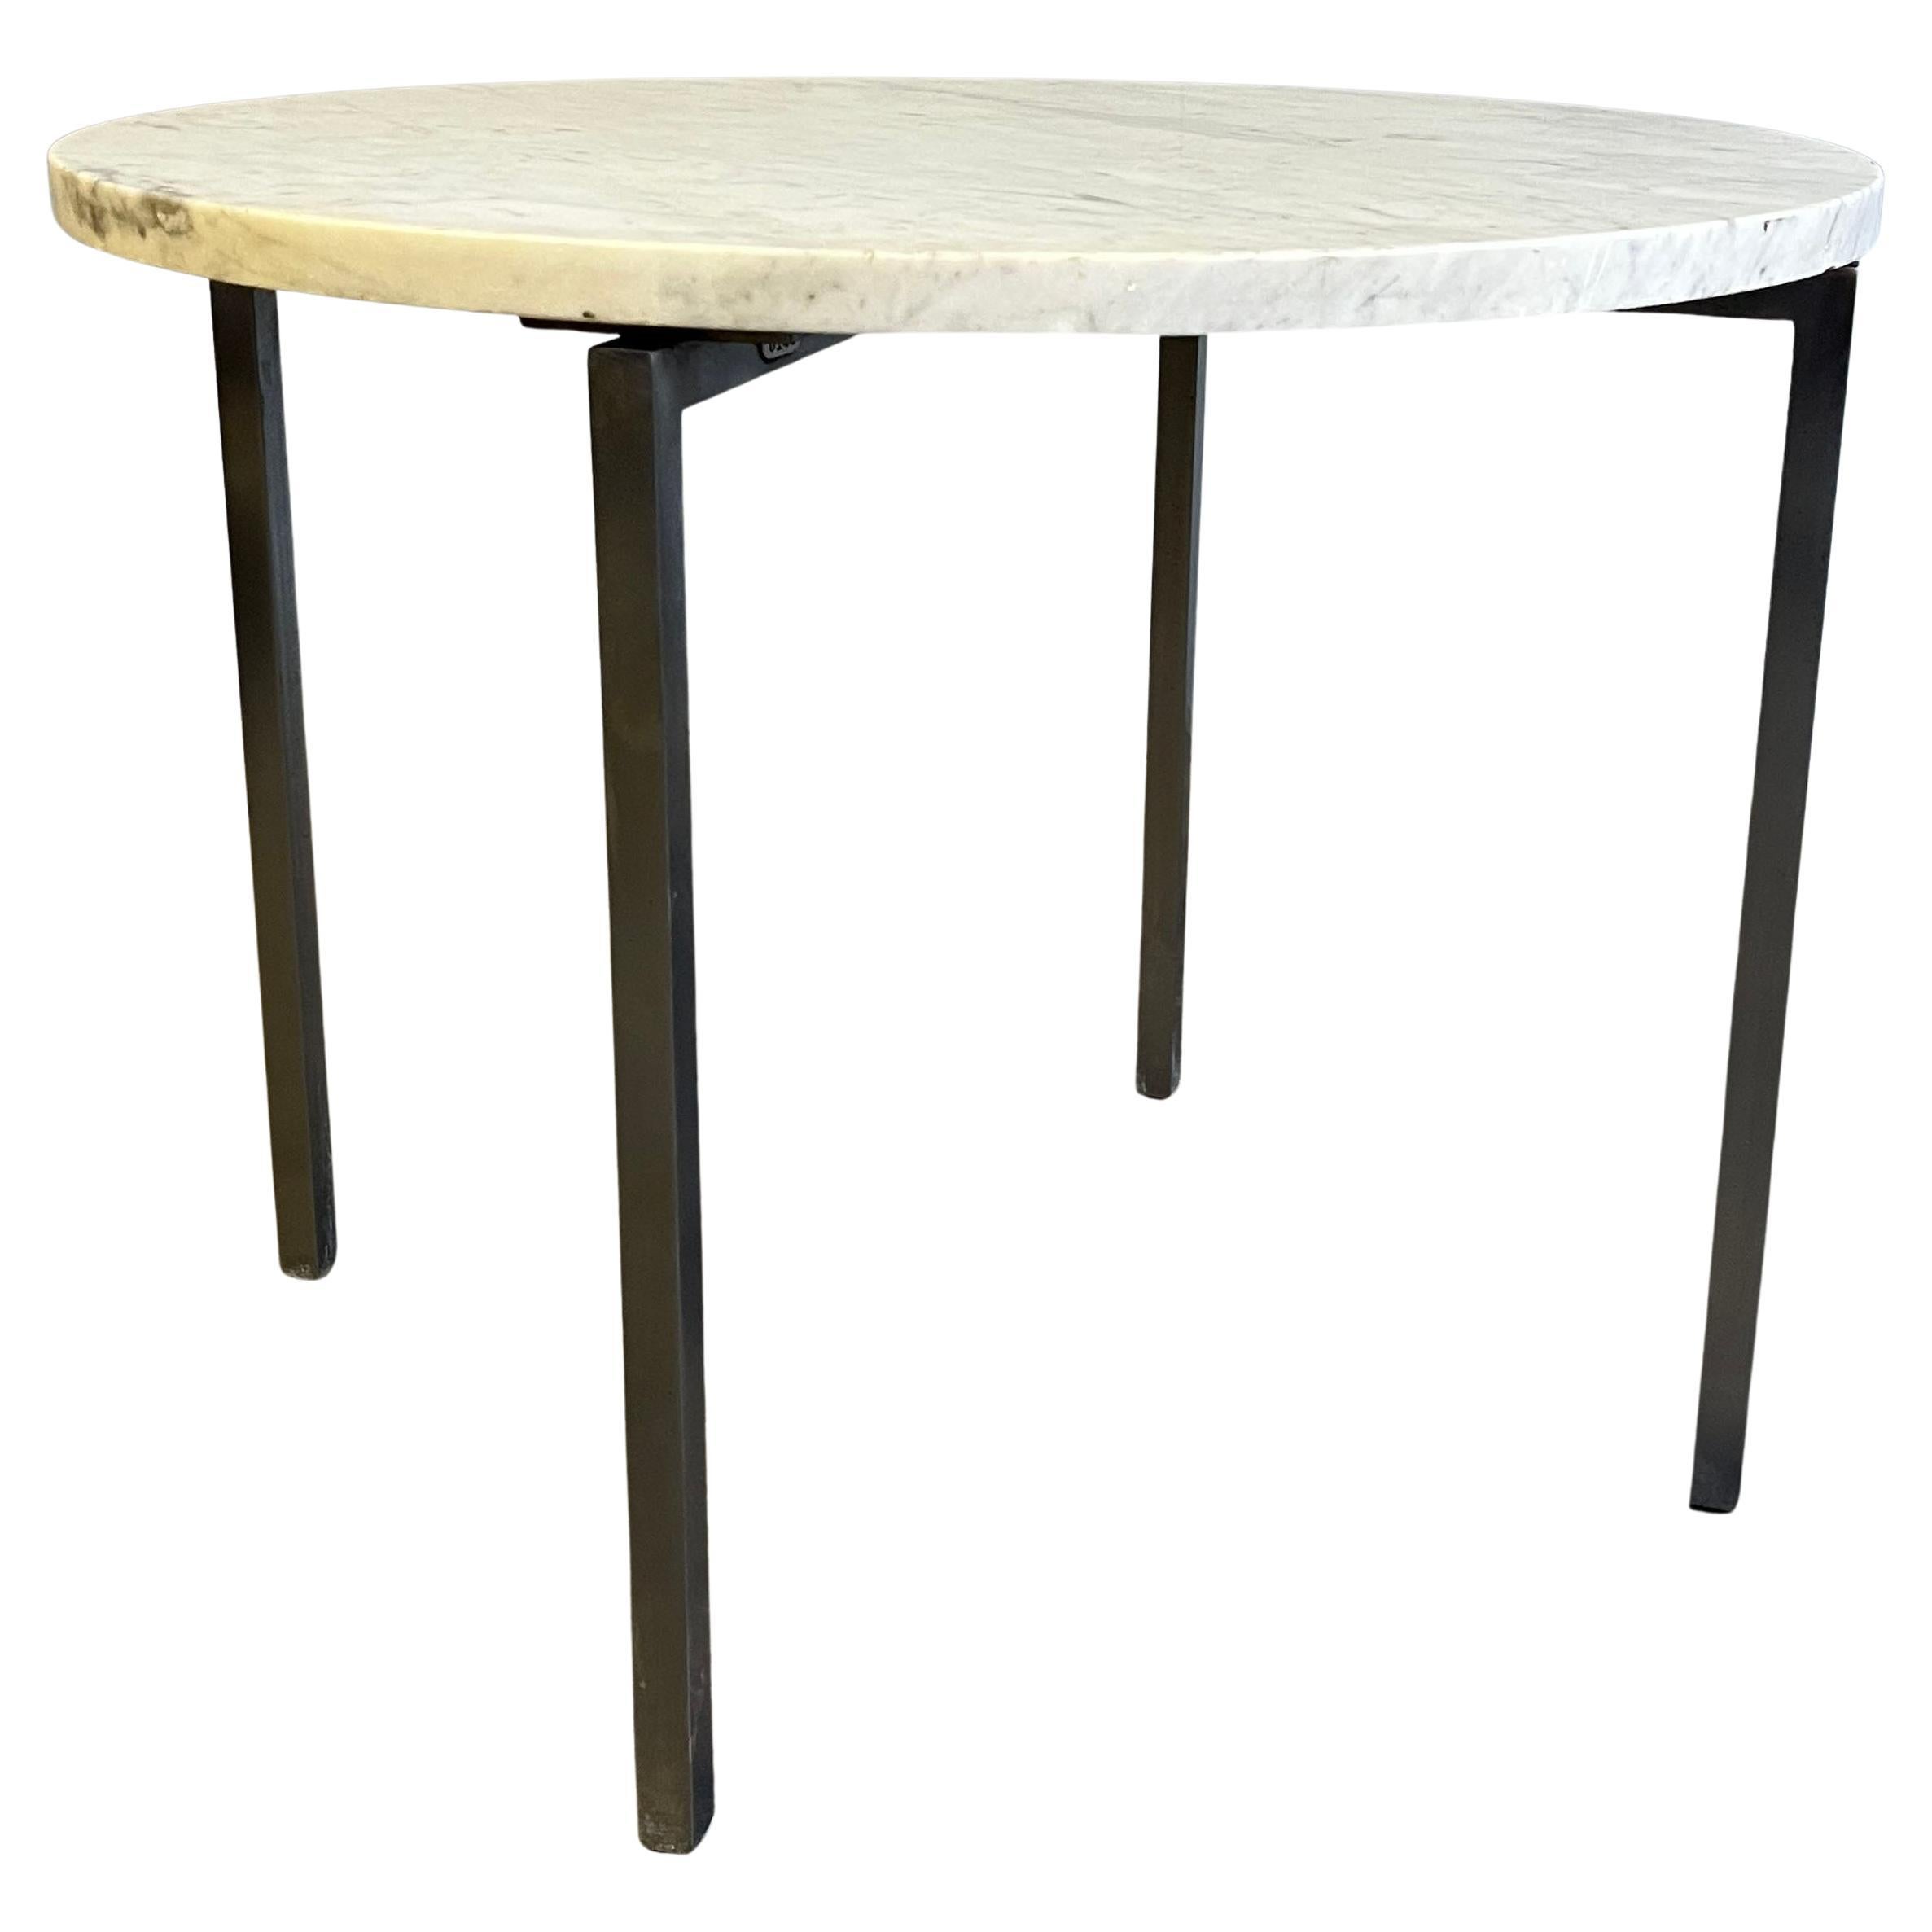 Nice round table with brushed chromed or nickel base. Rarely seen round table with great dimensions that could also be used as a small coffee table. 

Marble is original and  shows signs of use with some dings to the edges. Marble can easily be